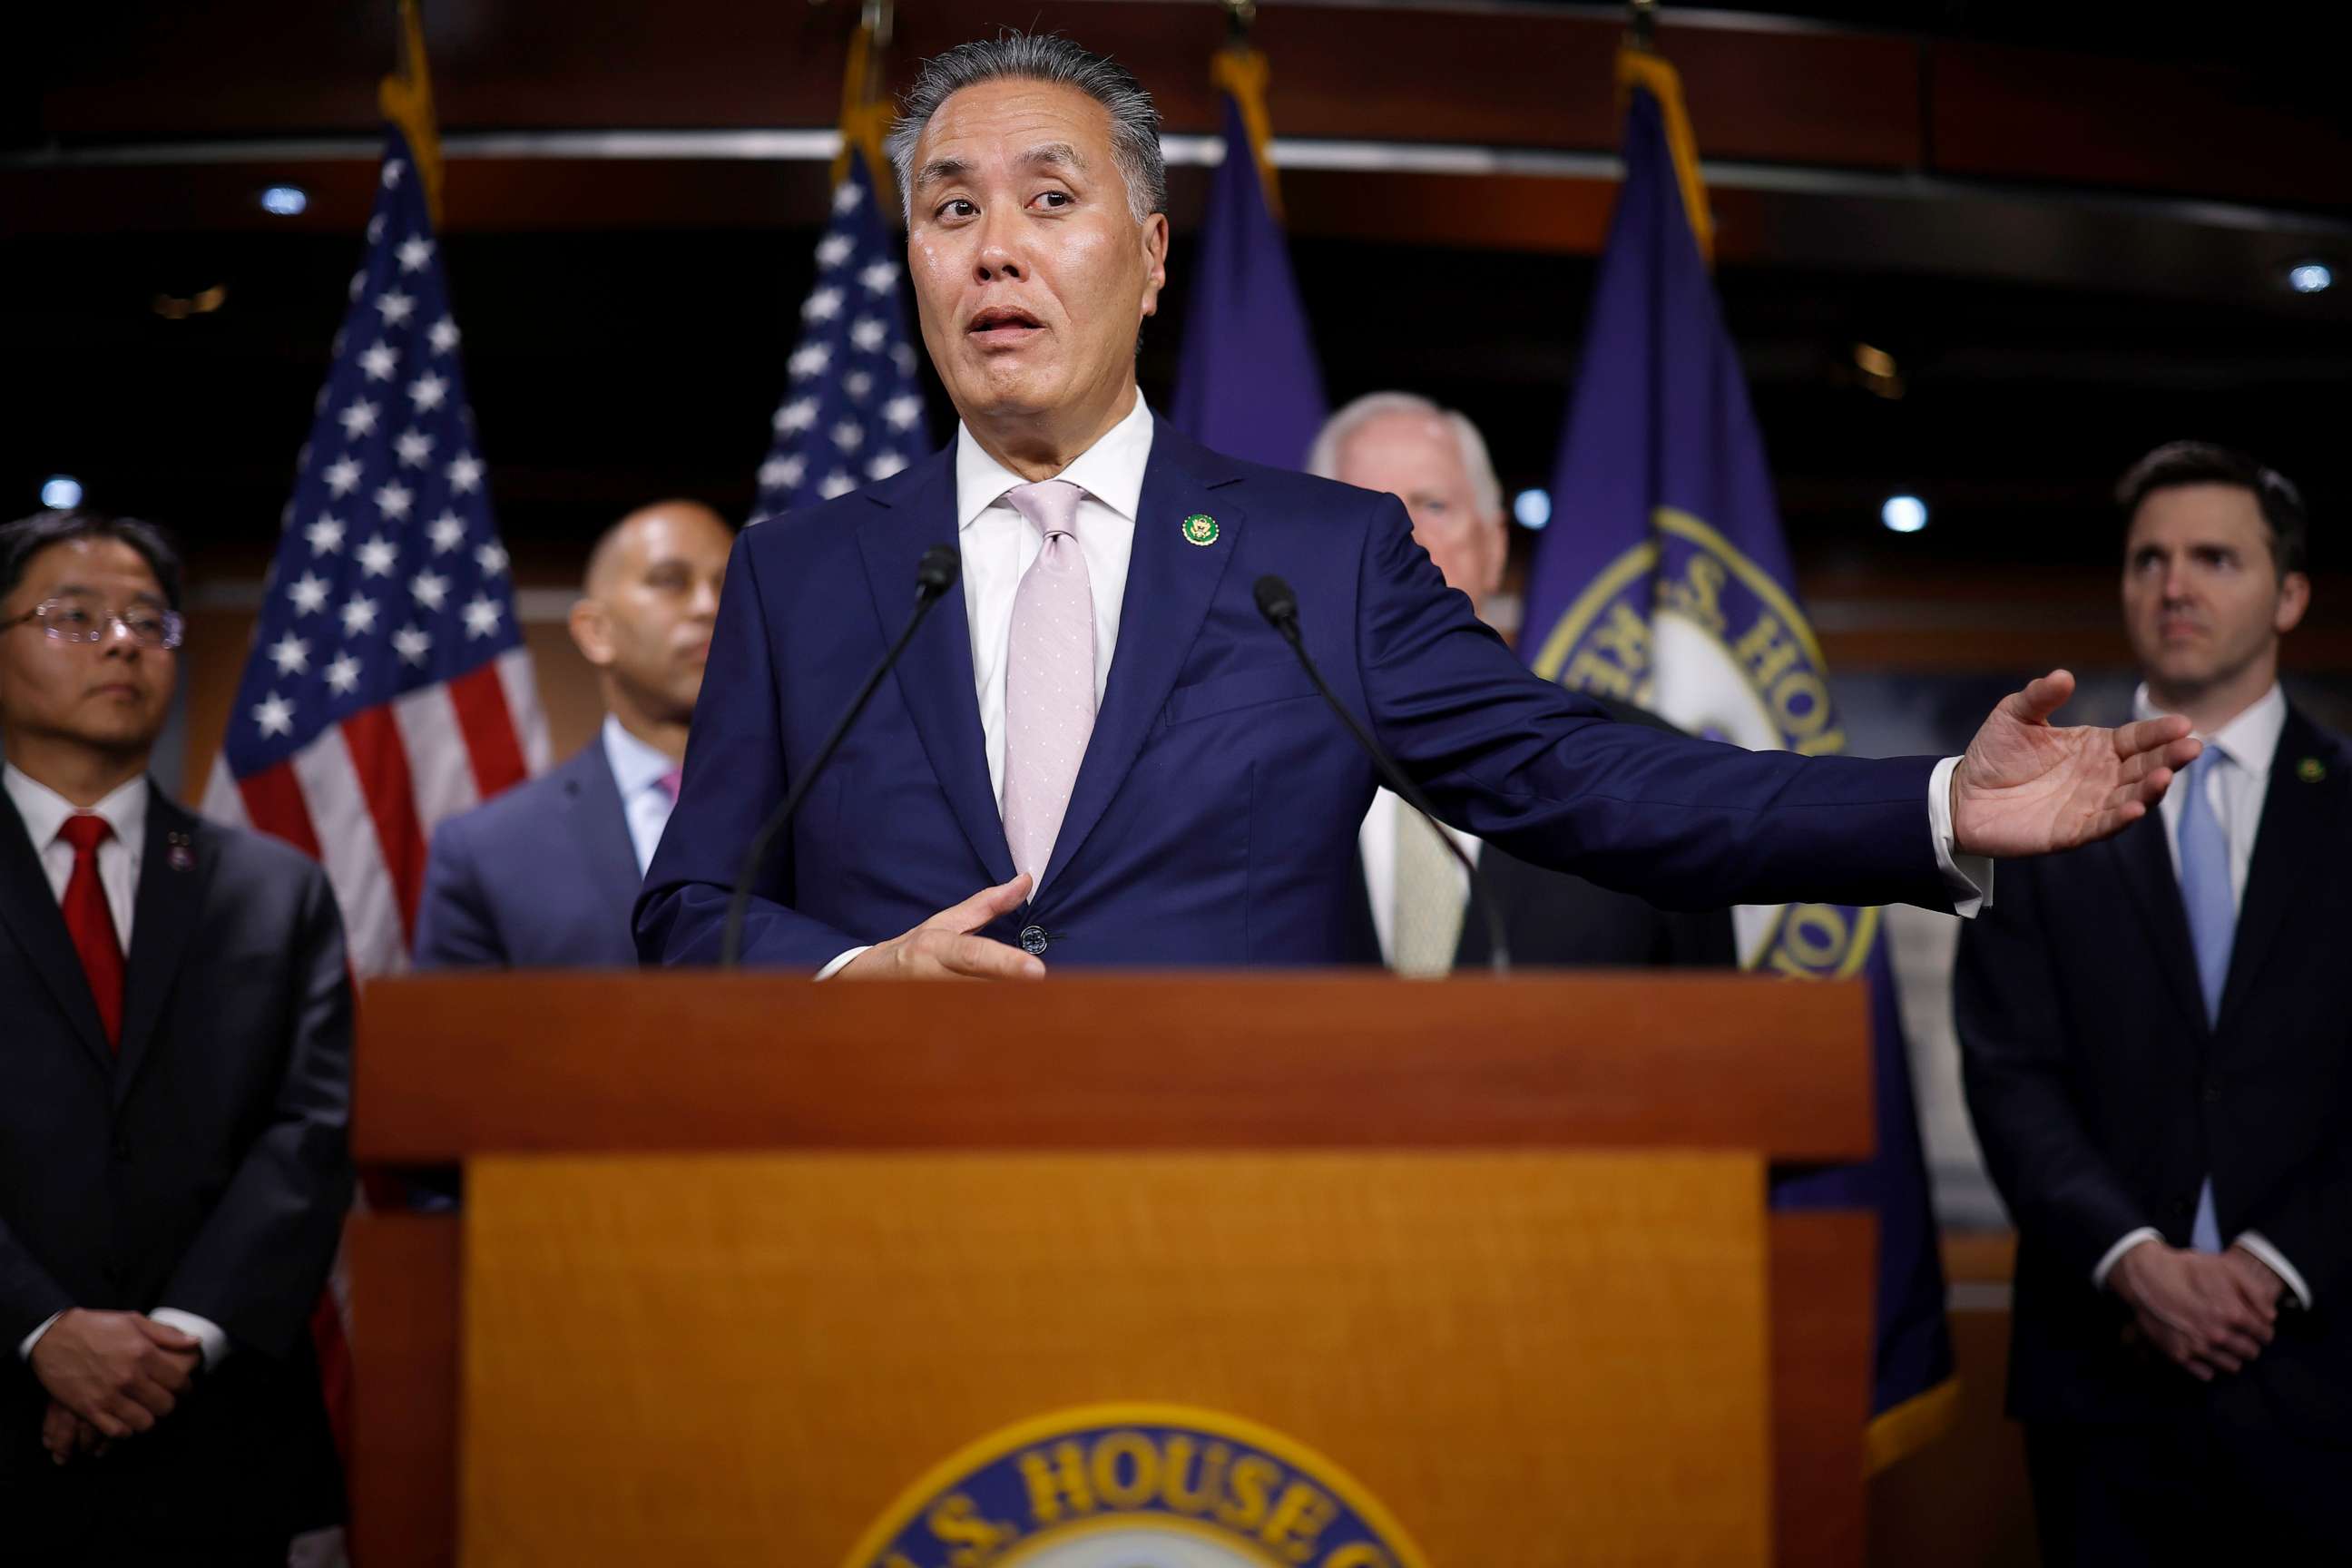 PHOTO: Rep. Mark Takano speaks at a news conference, May 25, 2023 in Washington, DC.